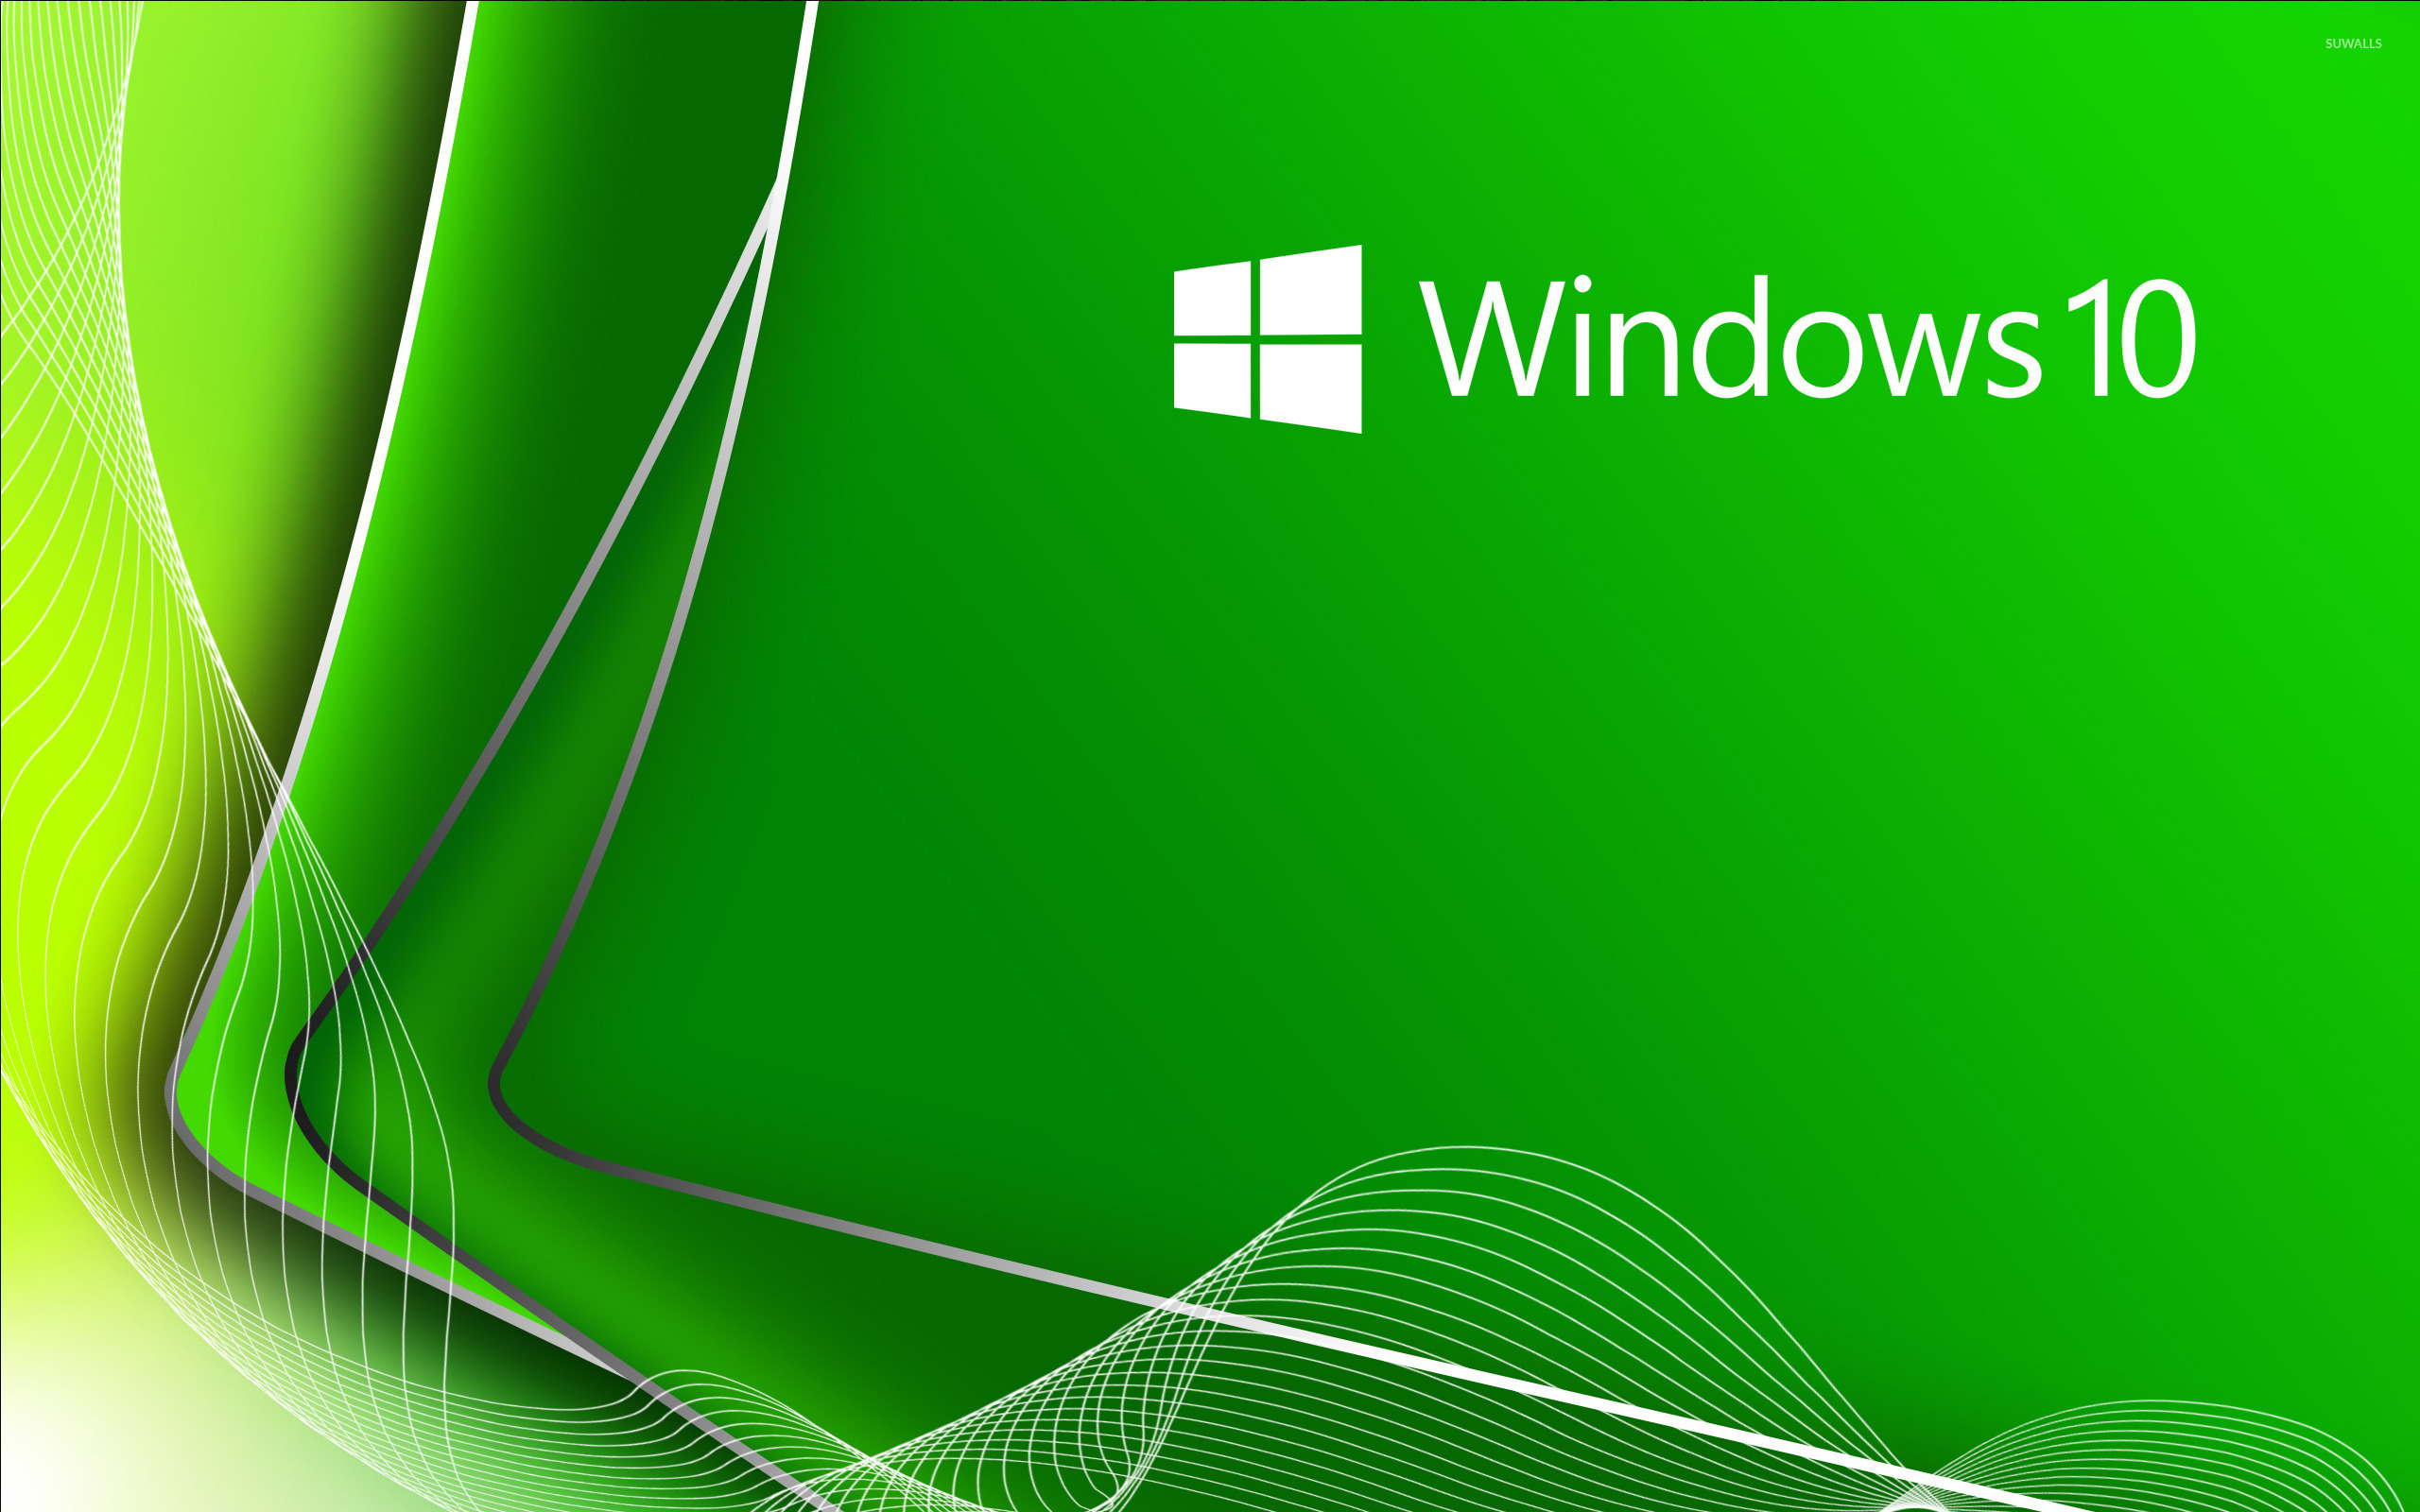 Windows White Text Logo On Green Curners Wallpaper Puter